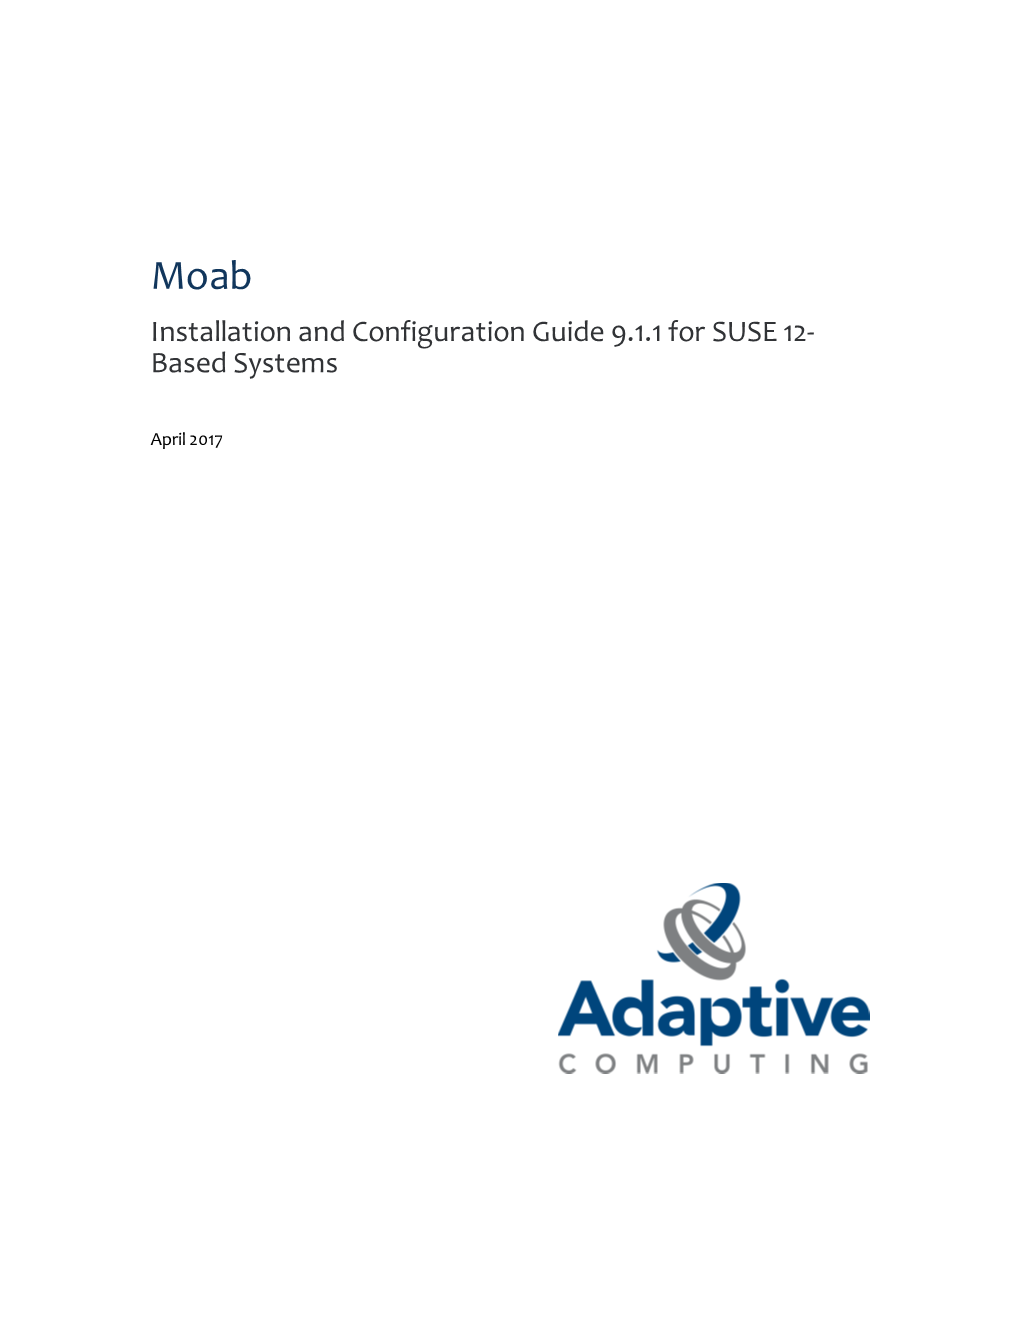 Moab Installation and Configuration Guide 9.1.1 for SUSE 12- Based Systems